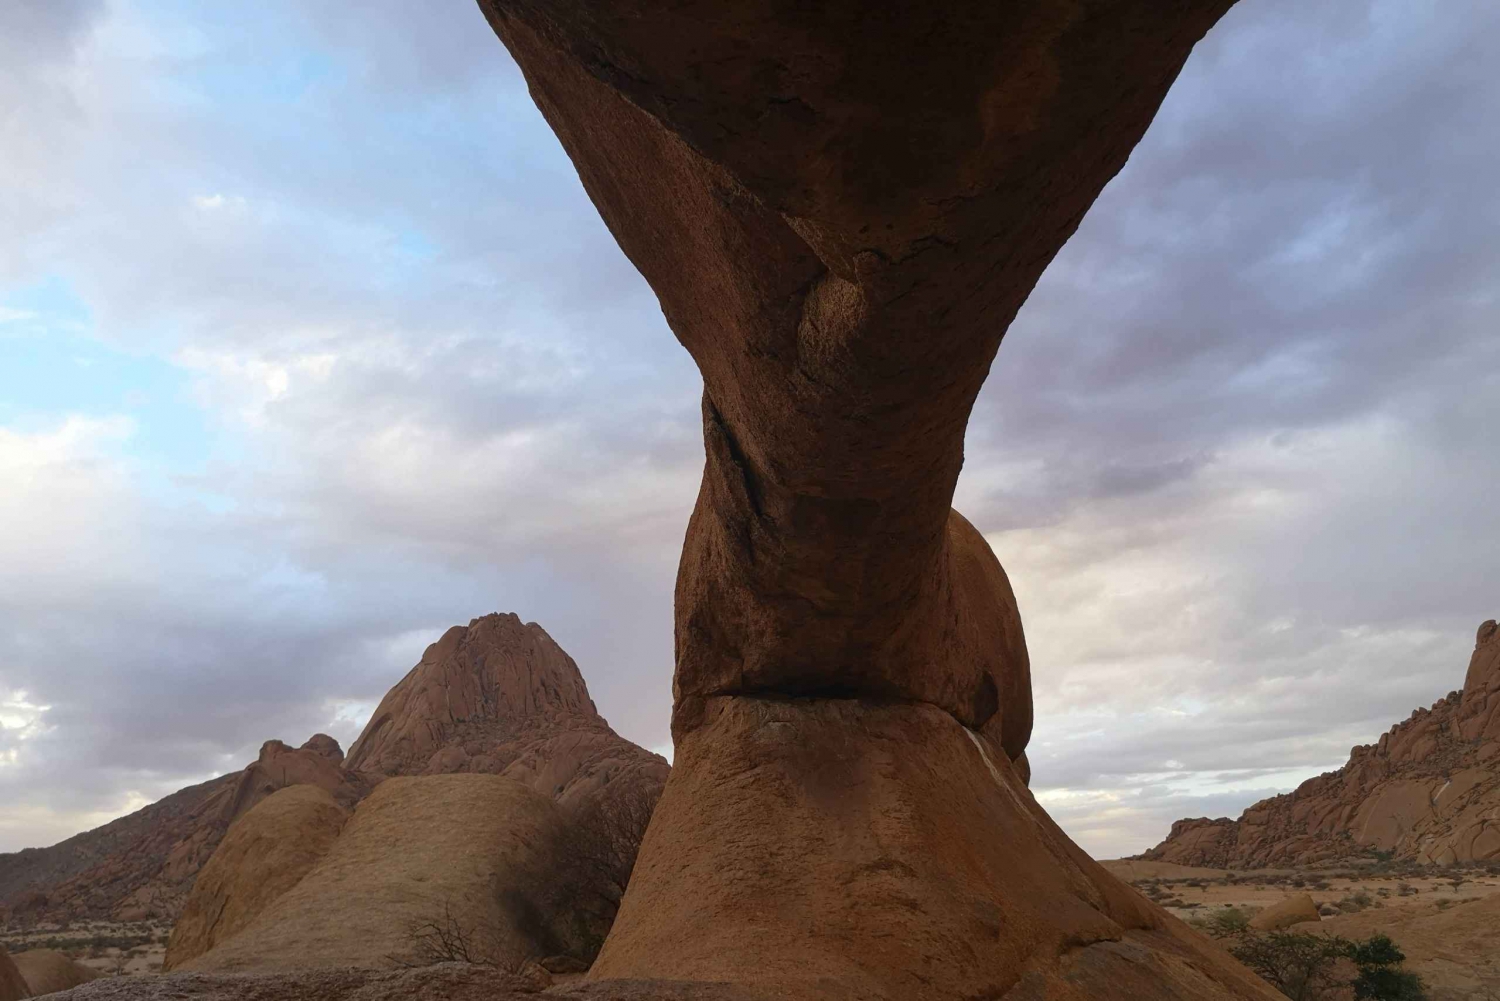 Spitzkoppe 2 Day Guided Camping Tours Namibia